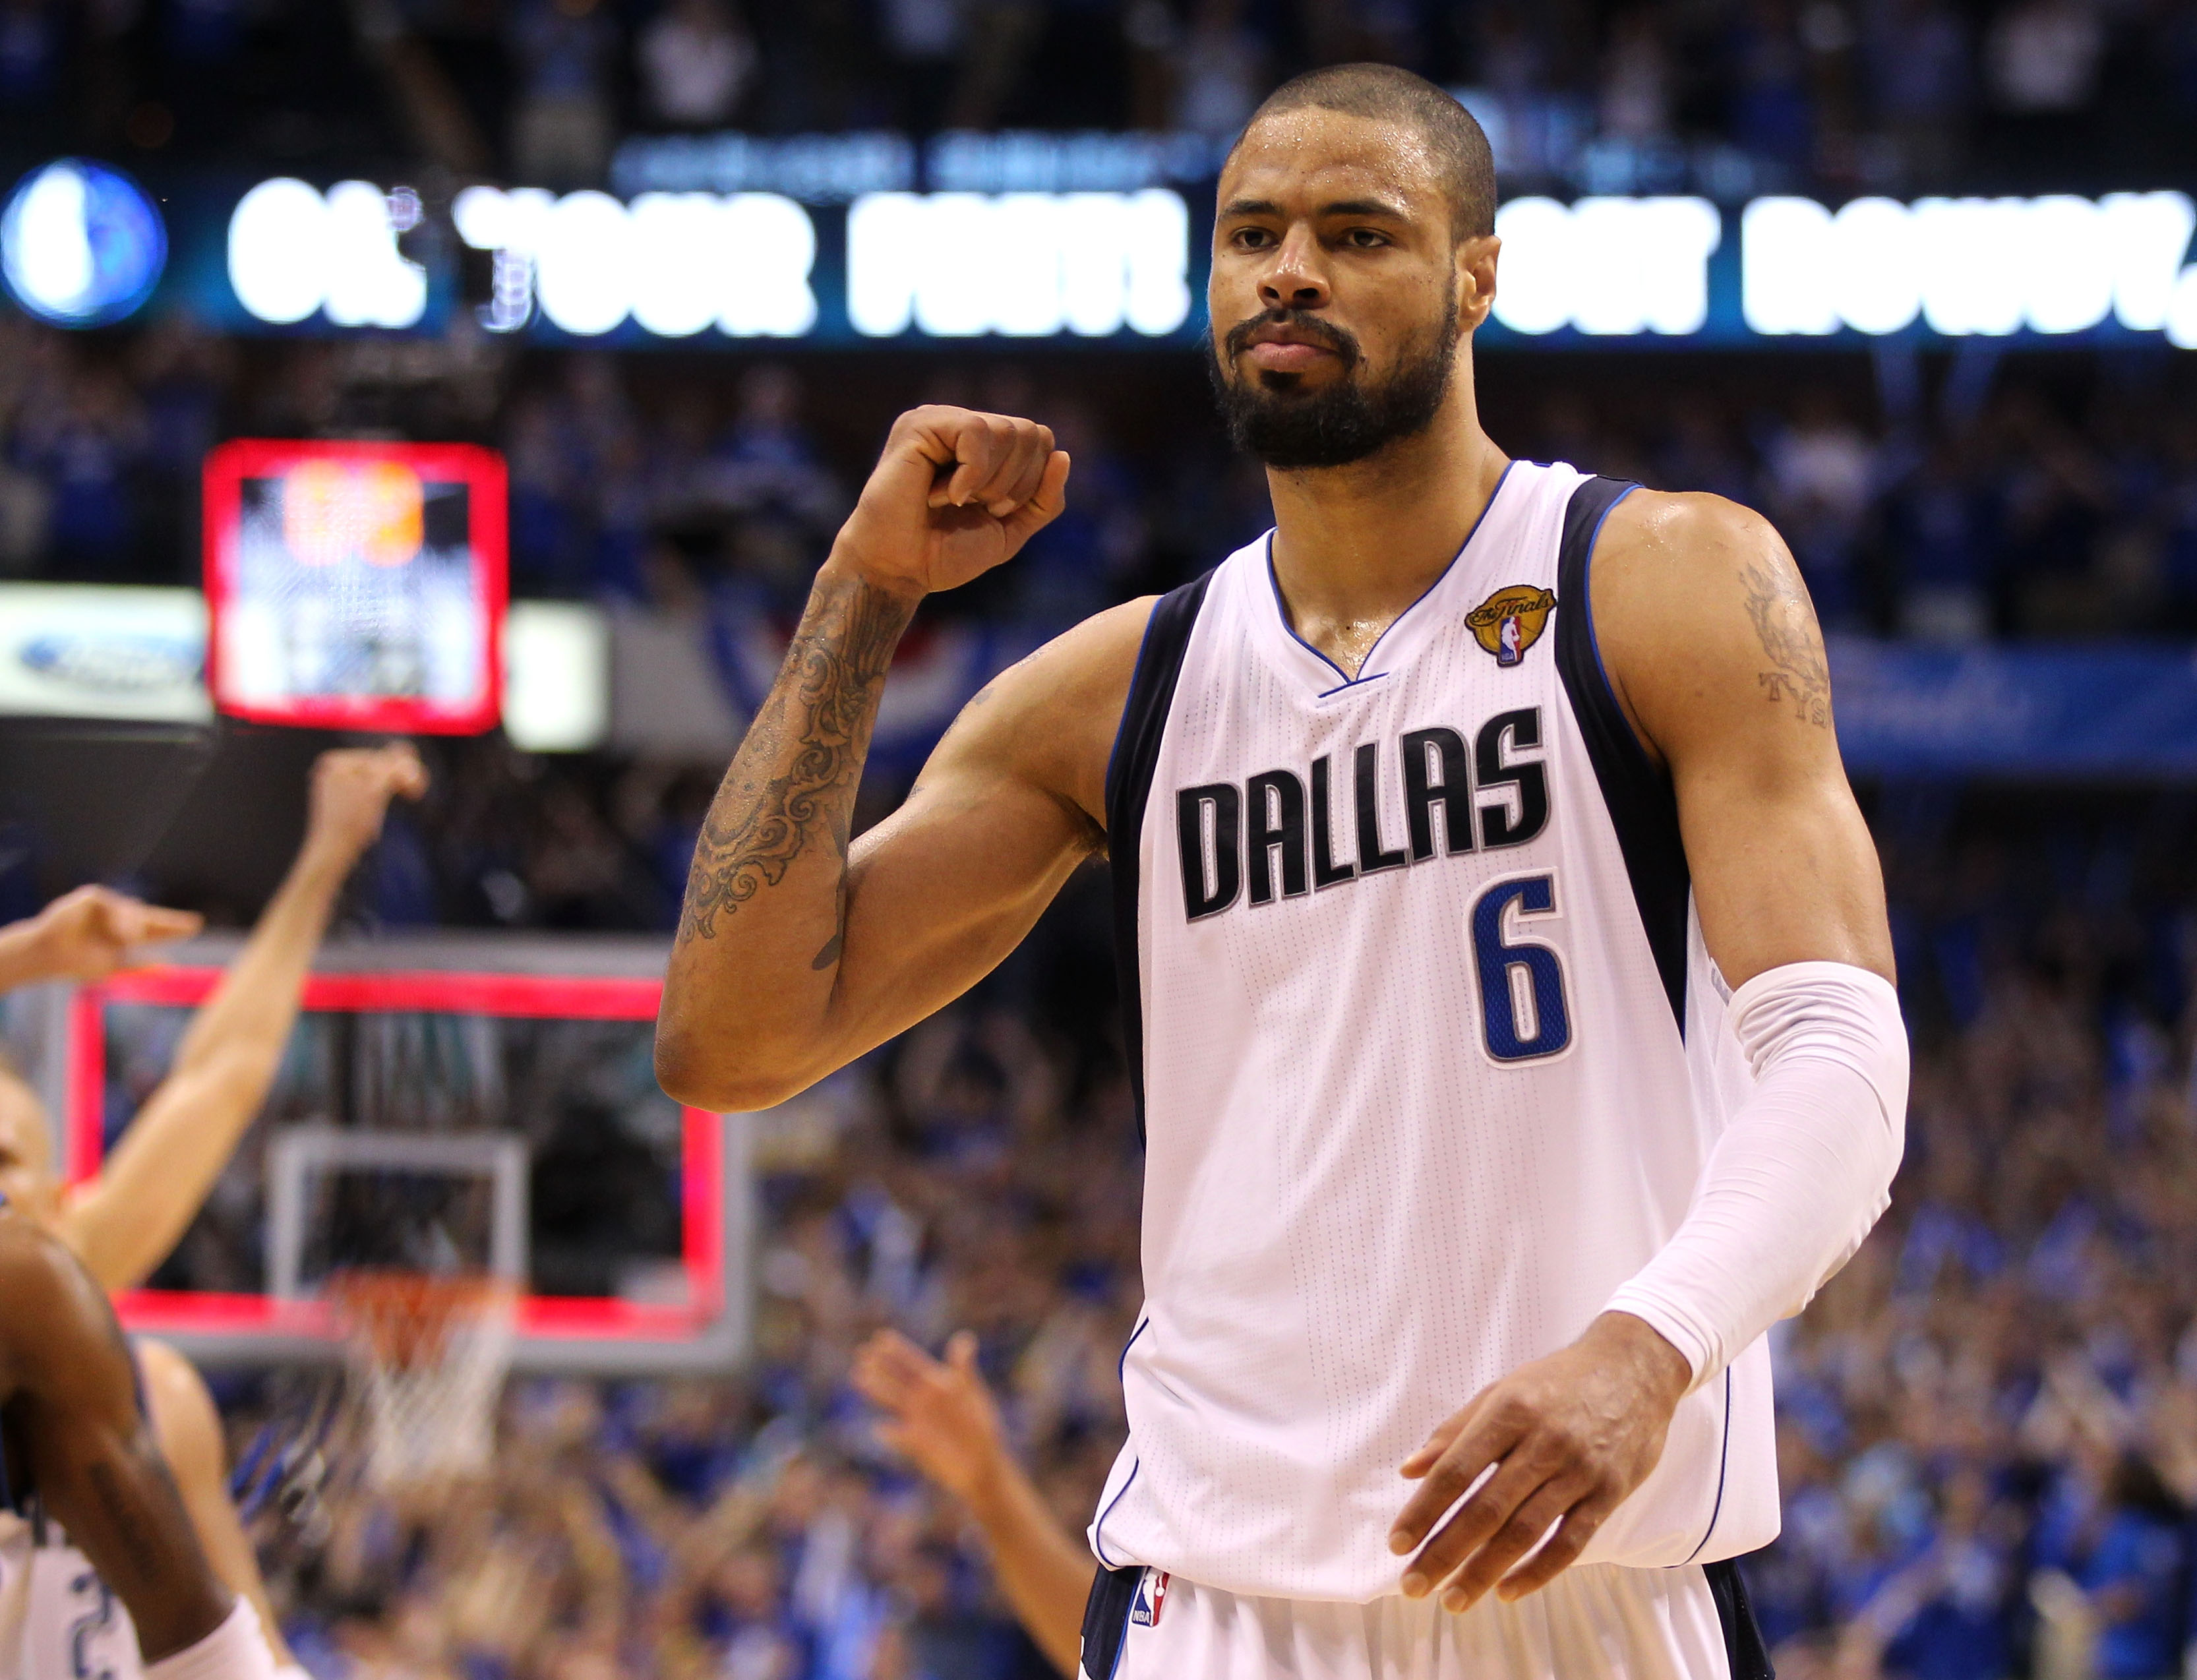 Tyson Chandler BEST Highlights with the Mavs (2010-2011 & 2014